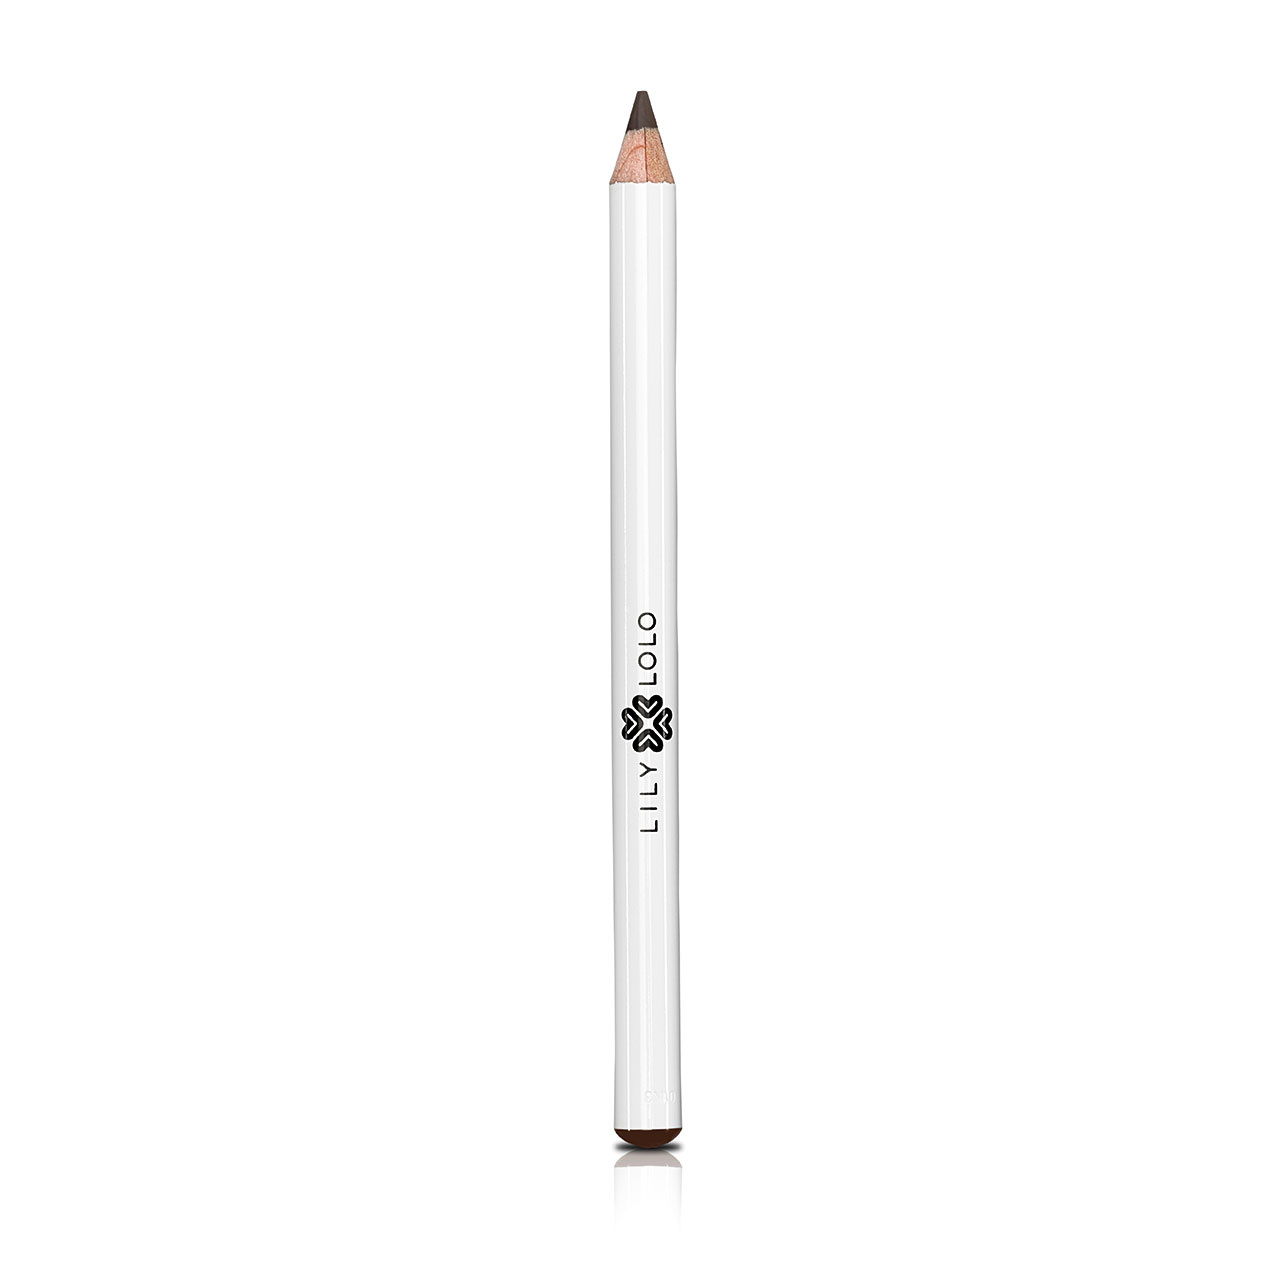 Lily Lolo Eyeliner Pencil Brown 1,14gr